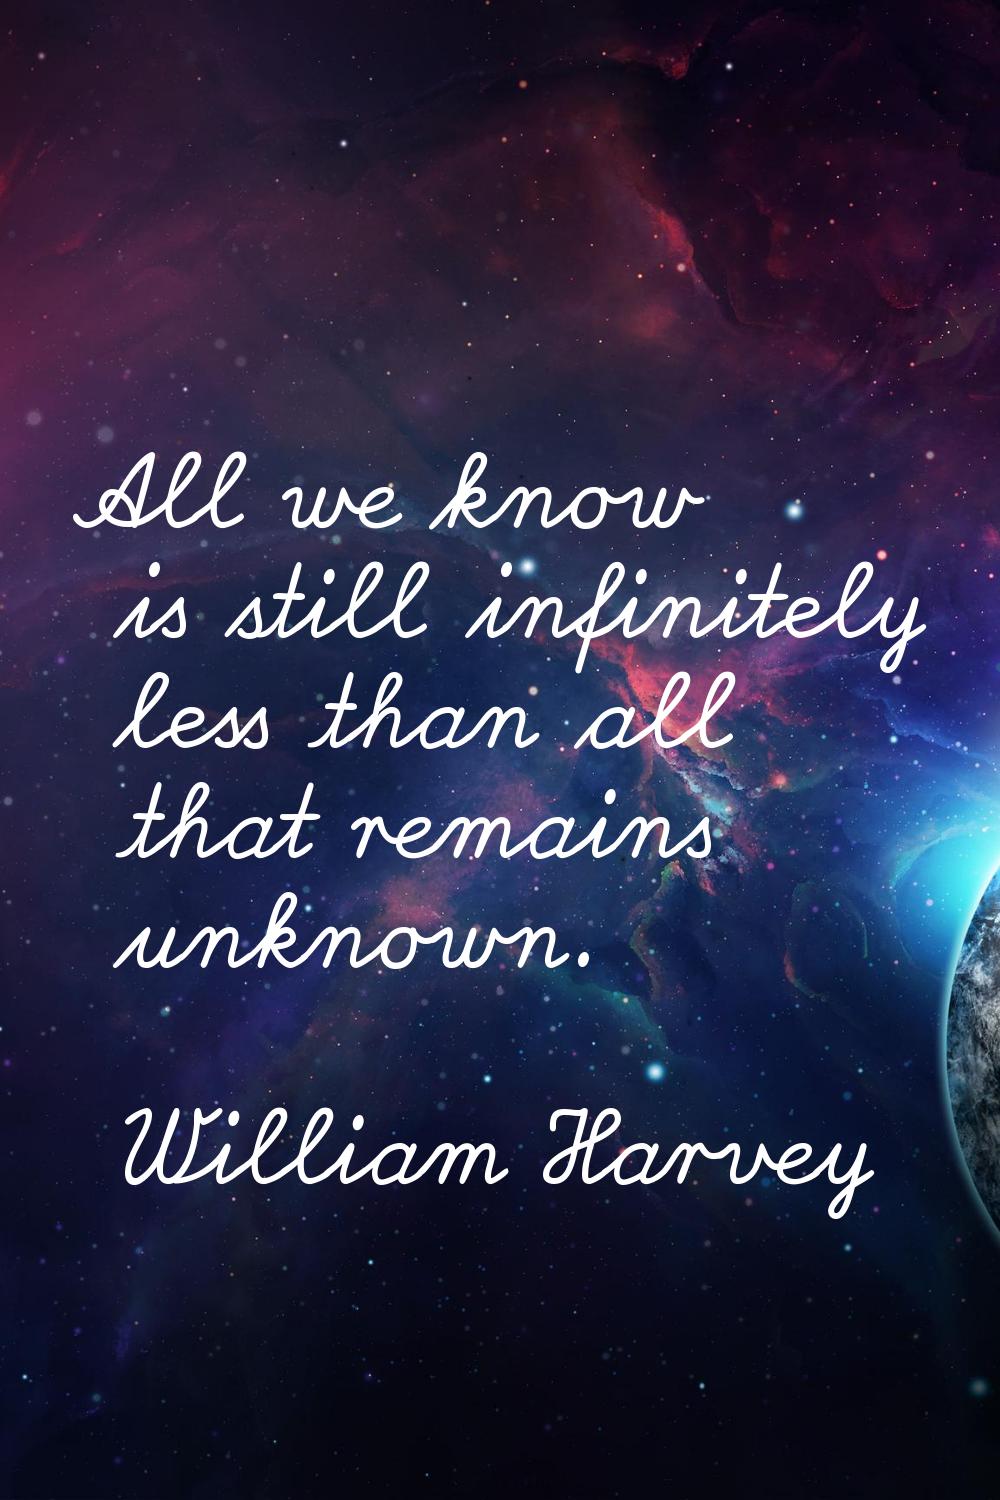 All we know is still infinitely less than all that remains unknown.